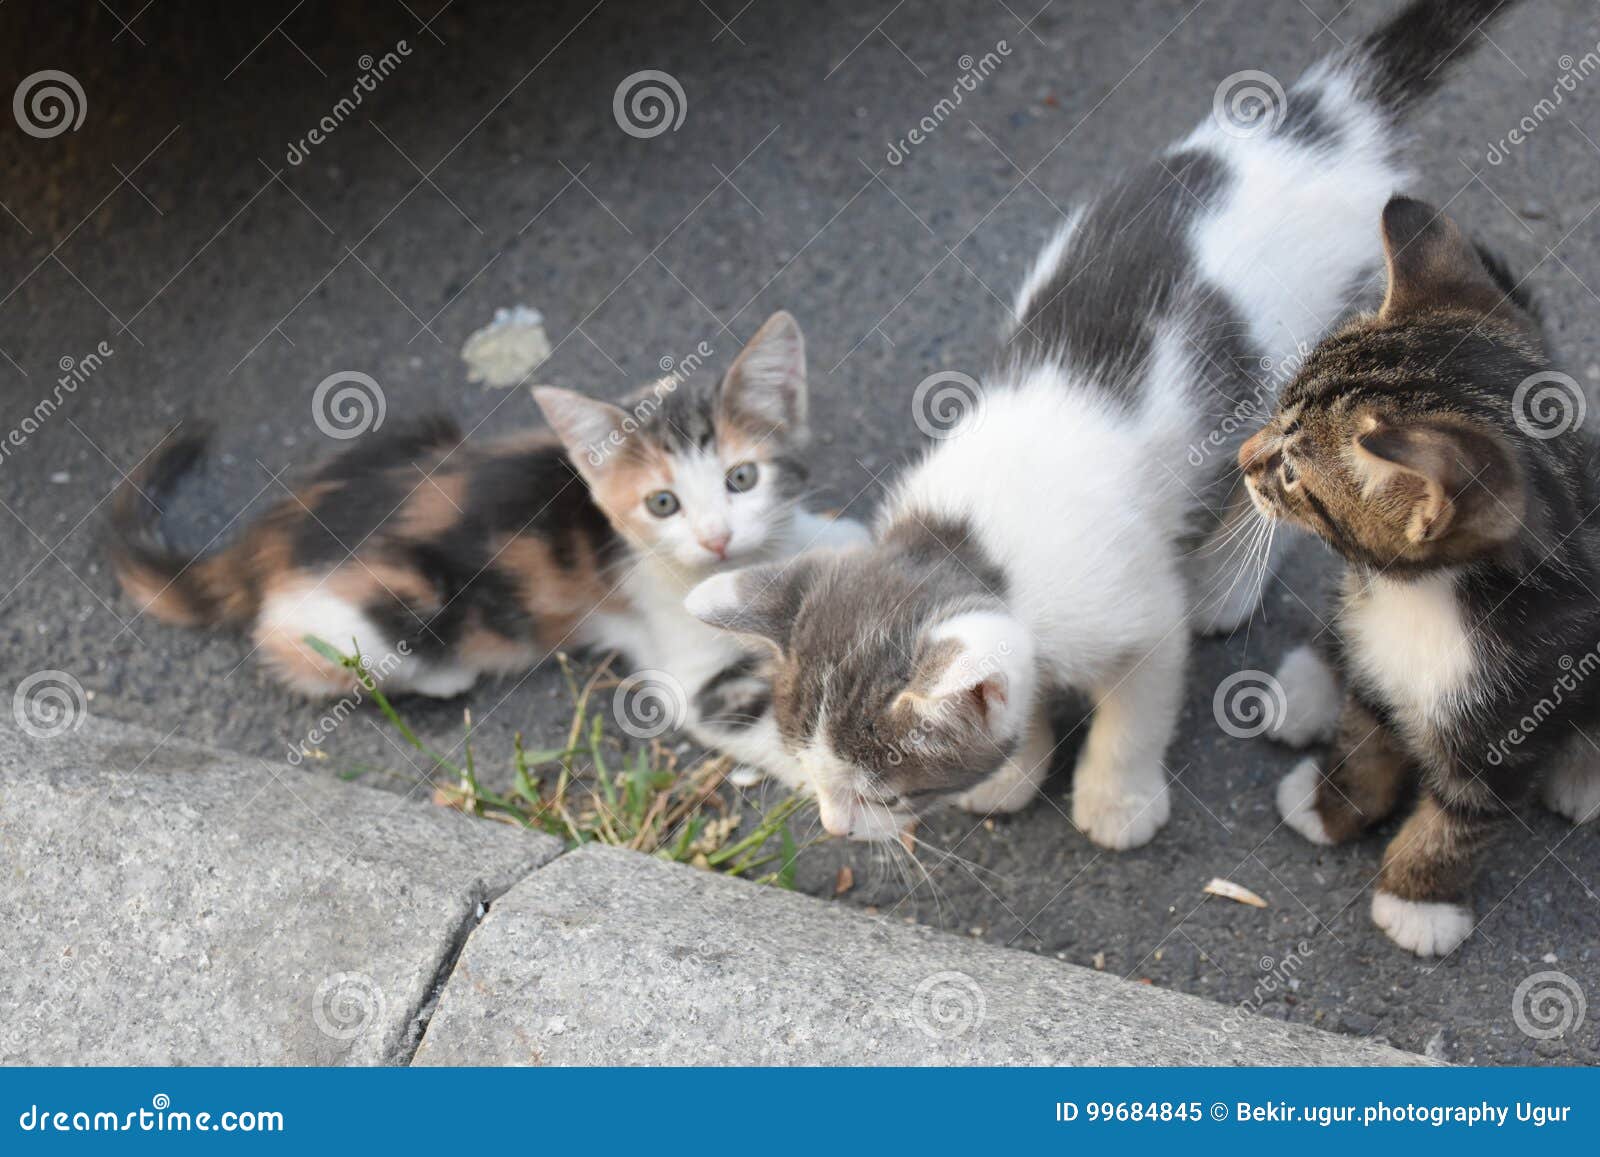 three young cute kittens playing in